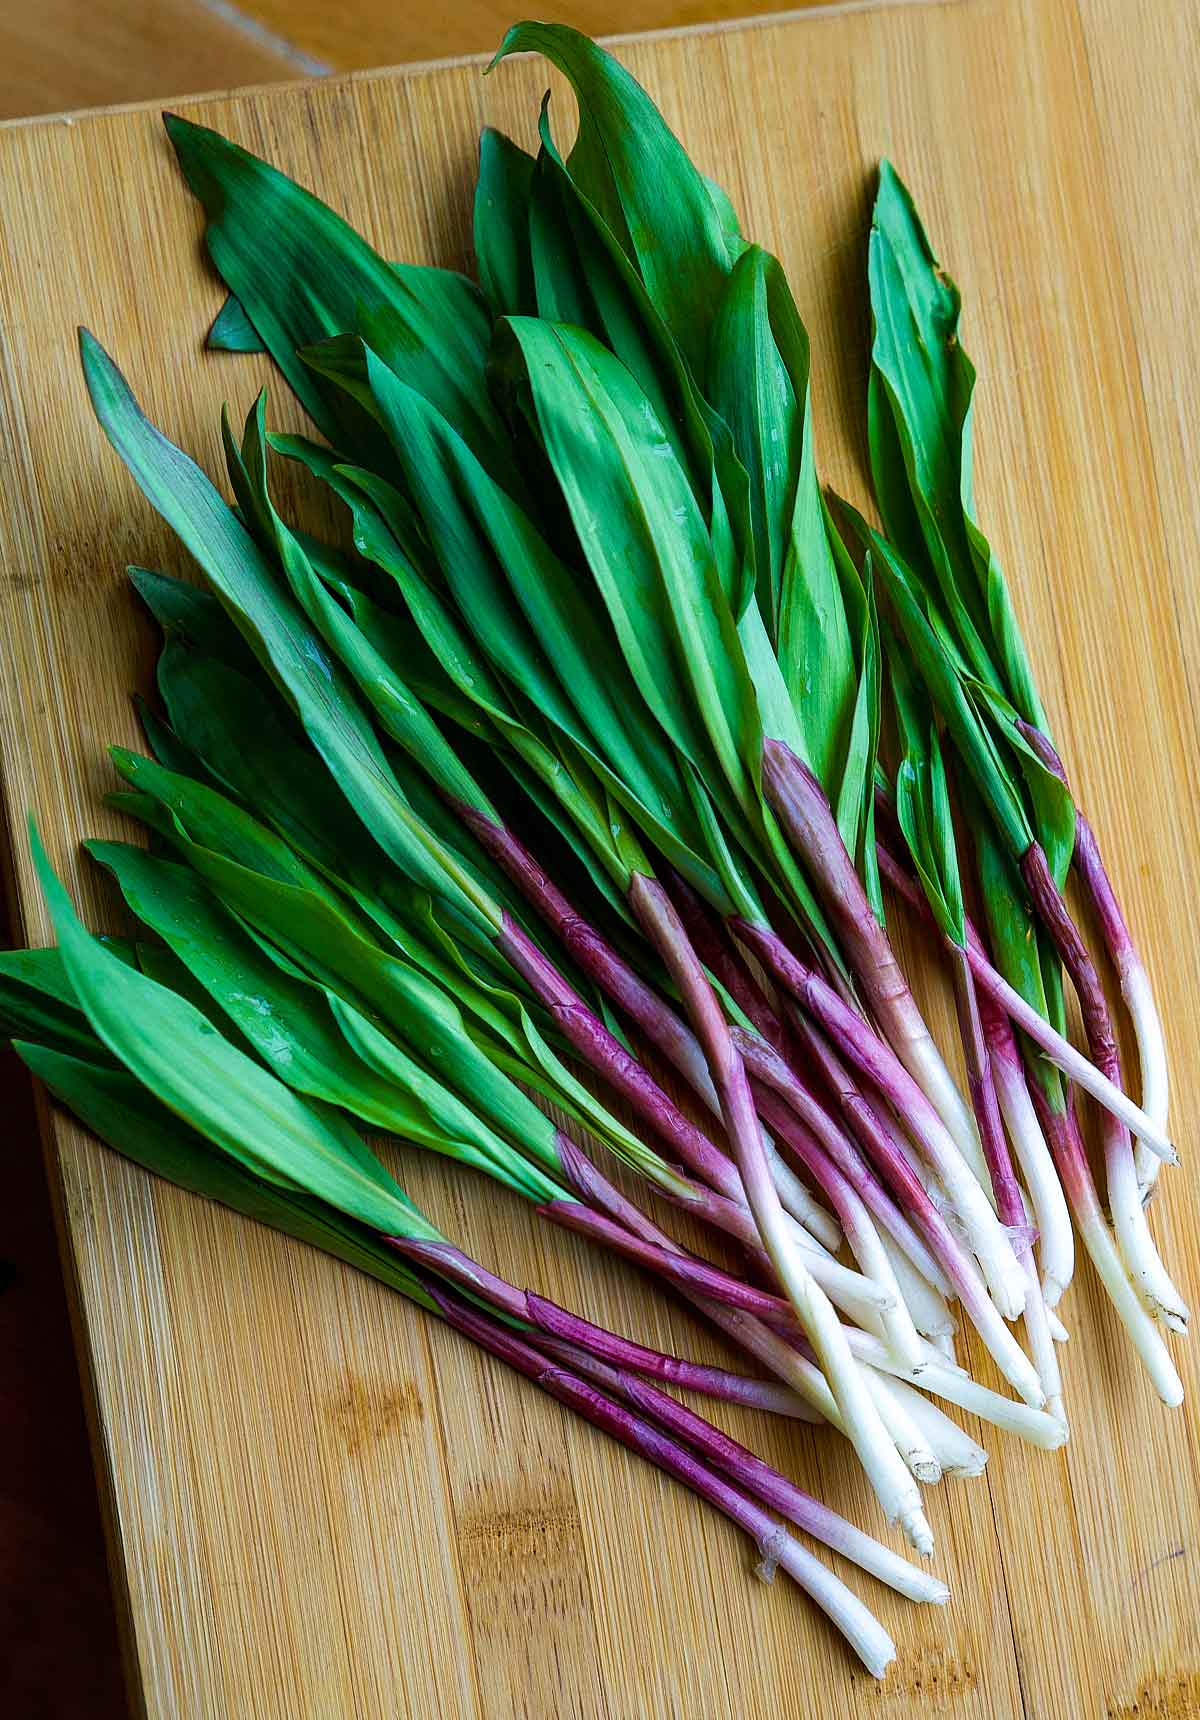 A pile of fresh ramps on a wooden cutting board in preparation to be made into seared ramps.